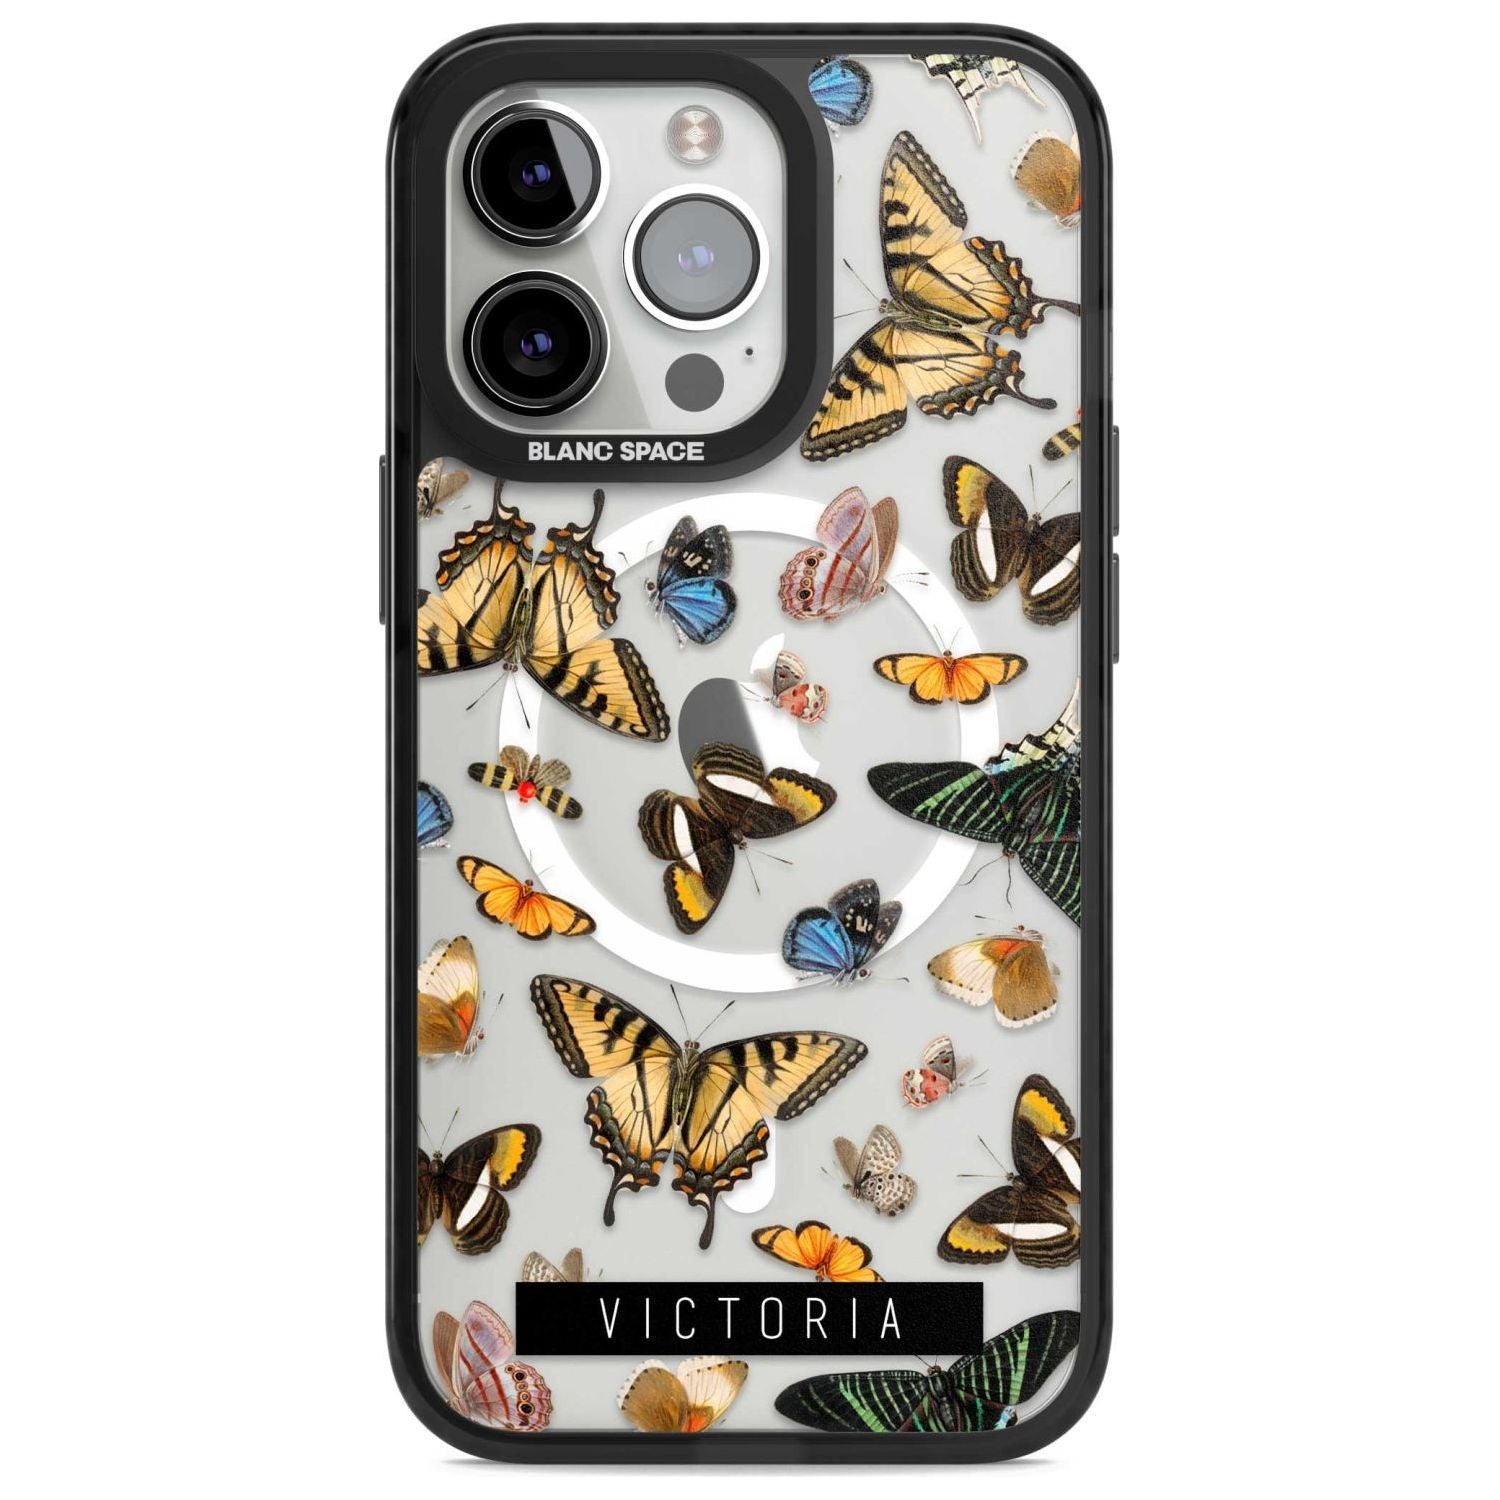 Personalised Photorealistic Butterfly Custom Phone Case iPhone 15 Pro Max / Magsafe Black Impact Case,iPhone 15 Pro / Magsafe Black Impact Case,iPhone 14 Pro Max / Magsafe Black Impact Case,iPhone 14 Pro / Magsafe Black Impact Case,iPhone 13 Pro / Magsafe Black Impact Case Blanc Space